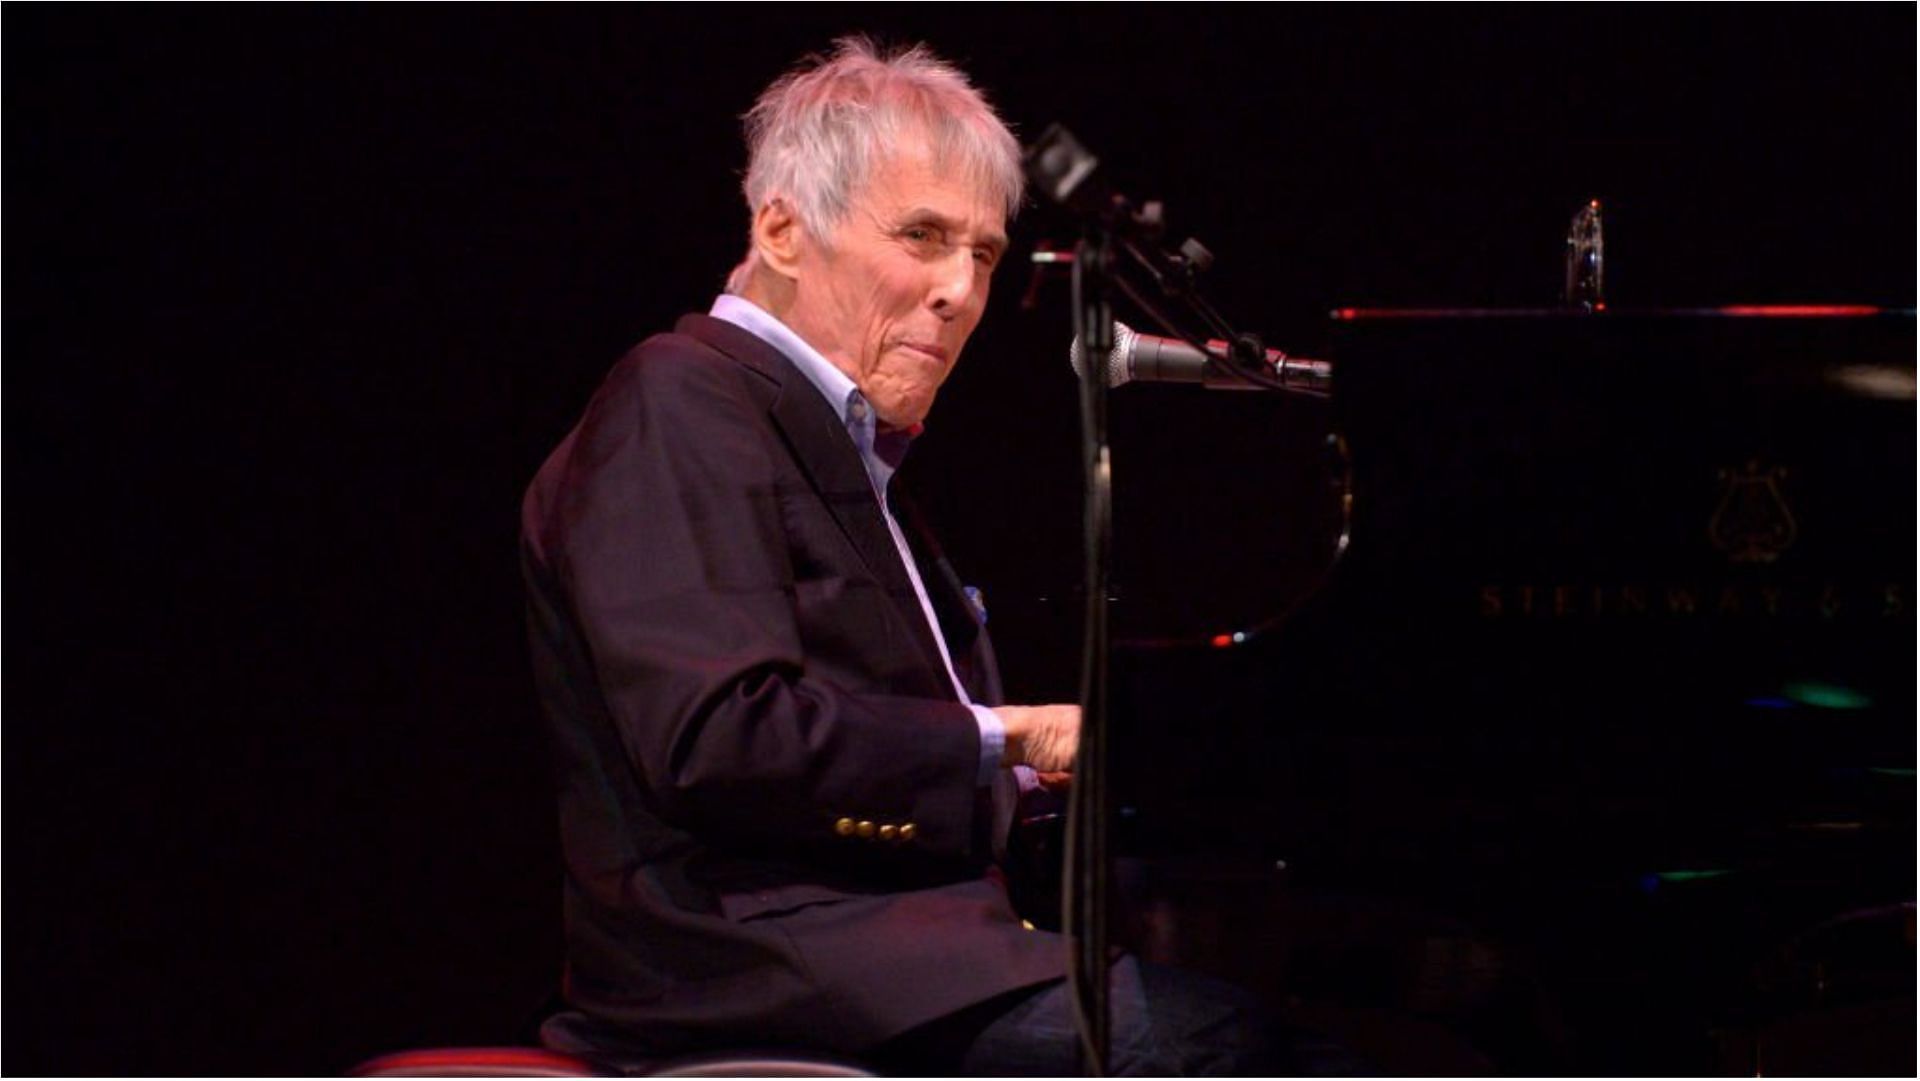 Burt Bacharach recently died at the age of 94 (Image via Michael Tullberg/Getty Images)